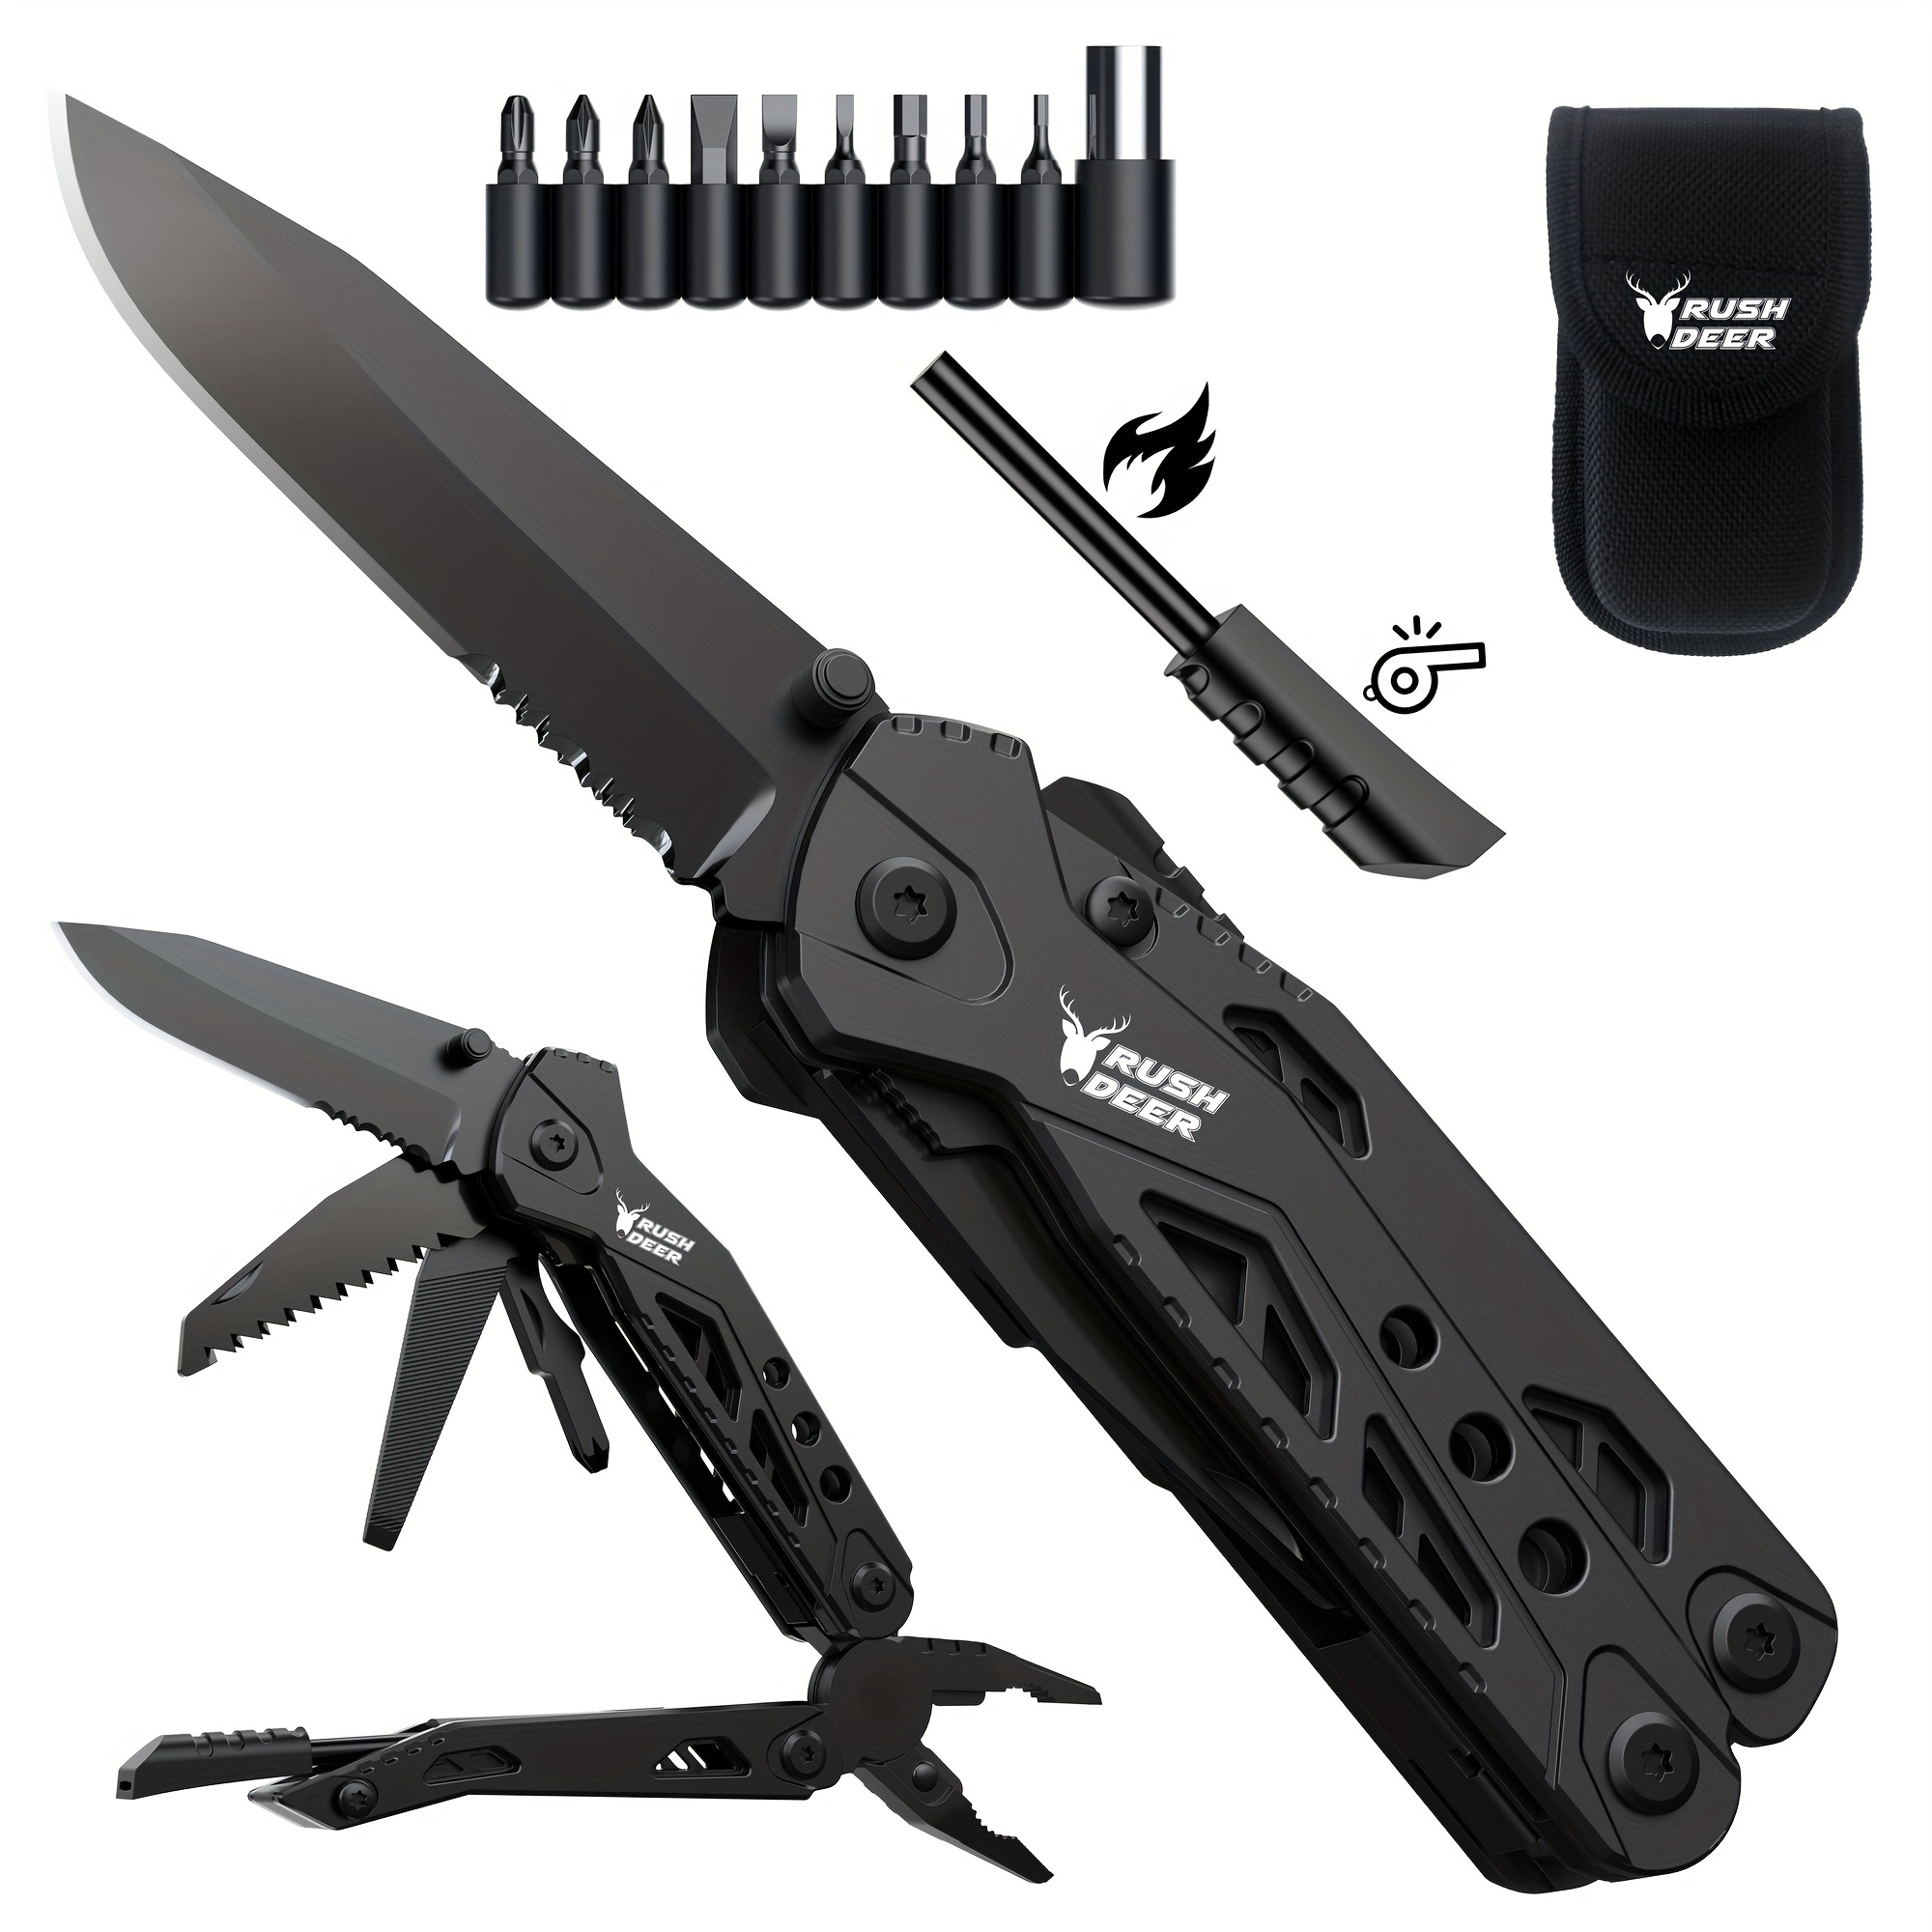 

16-in-1 Multitool Knife - Camping Survival Knife With Pliers, Screwdrivers, Bottle Opener - Safety Lock & Nylon Sheath Included, Rush Deer Multitool Knife - Unique Gift For Boyfriend, Dad, Husband